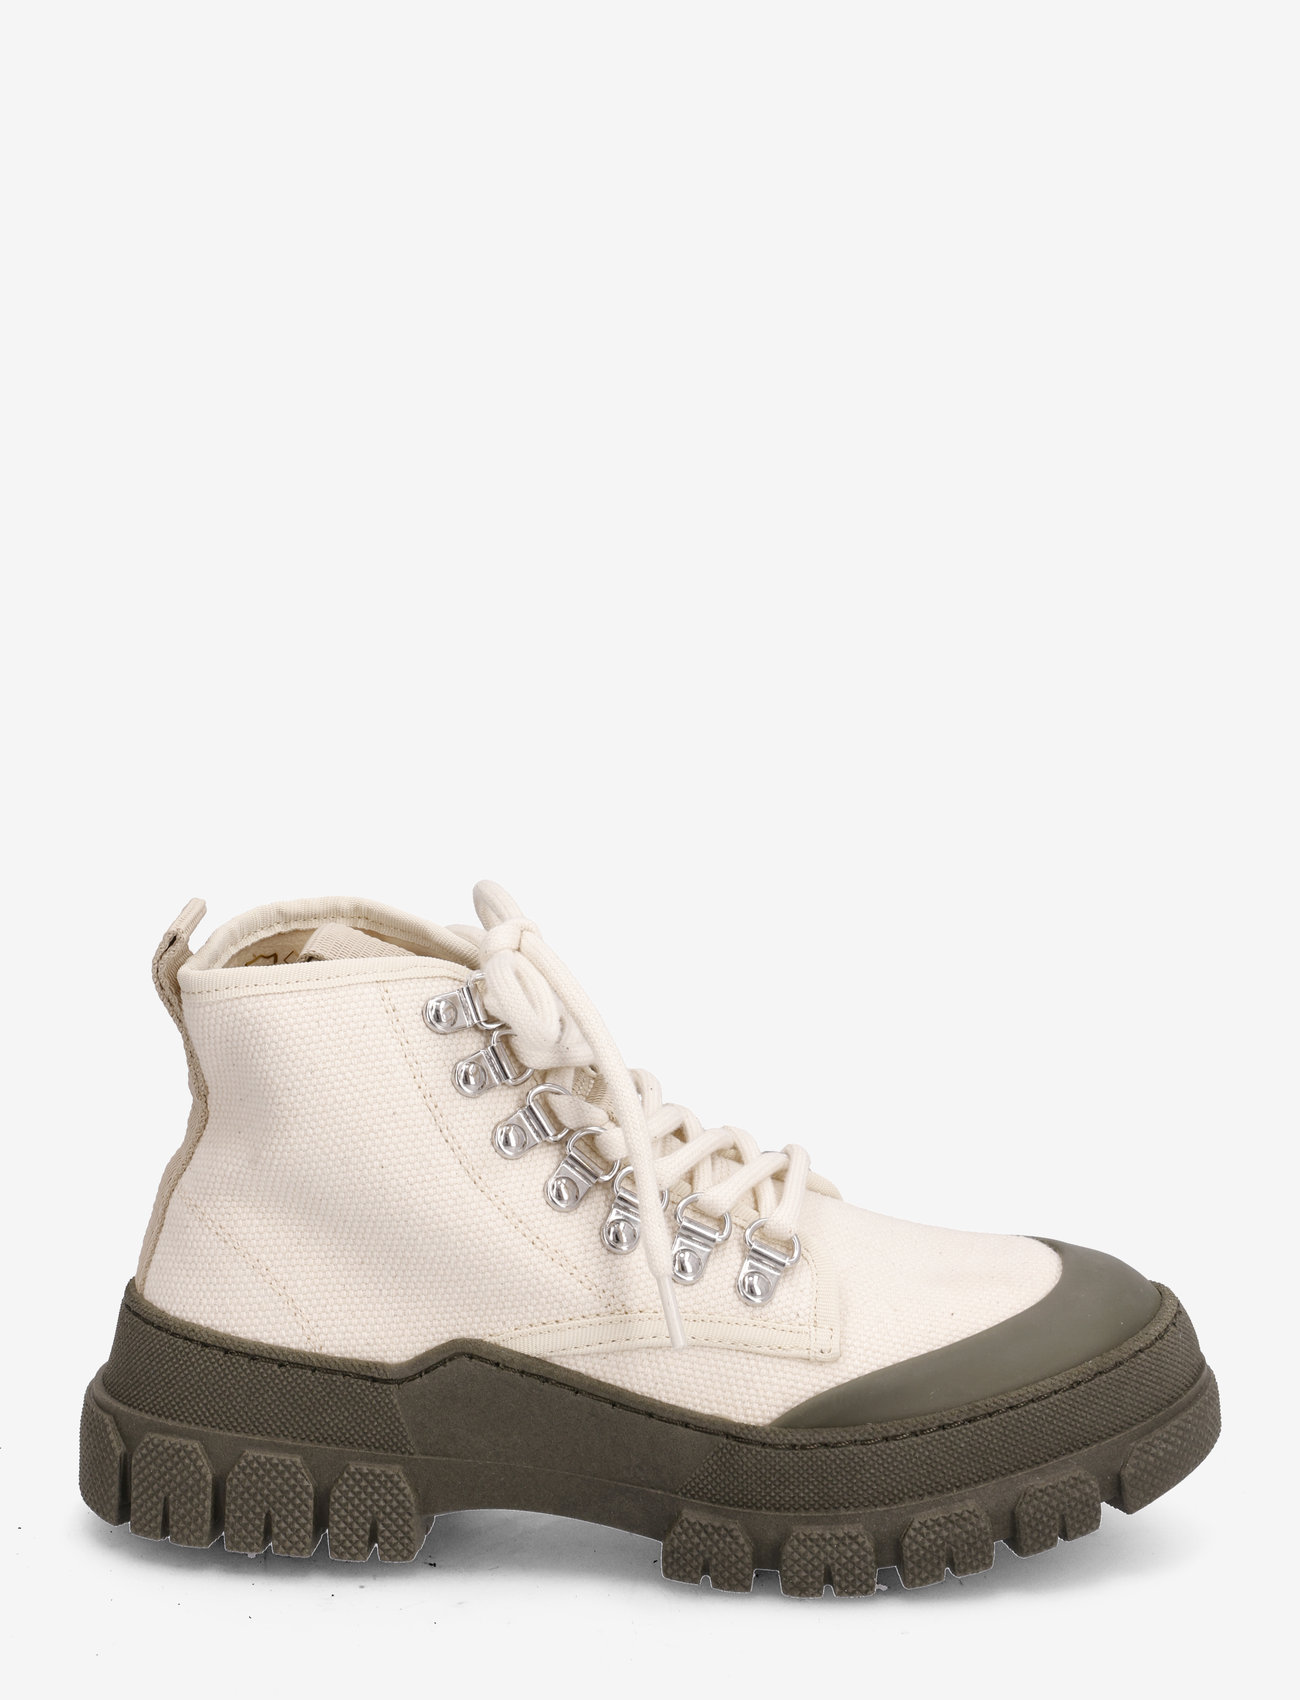 Garment Project - Twig High - Off White / Army - geschnürte stiefel - off white - 1